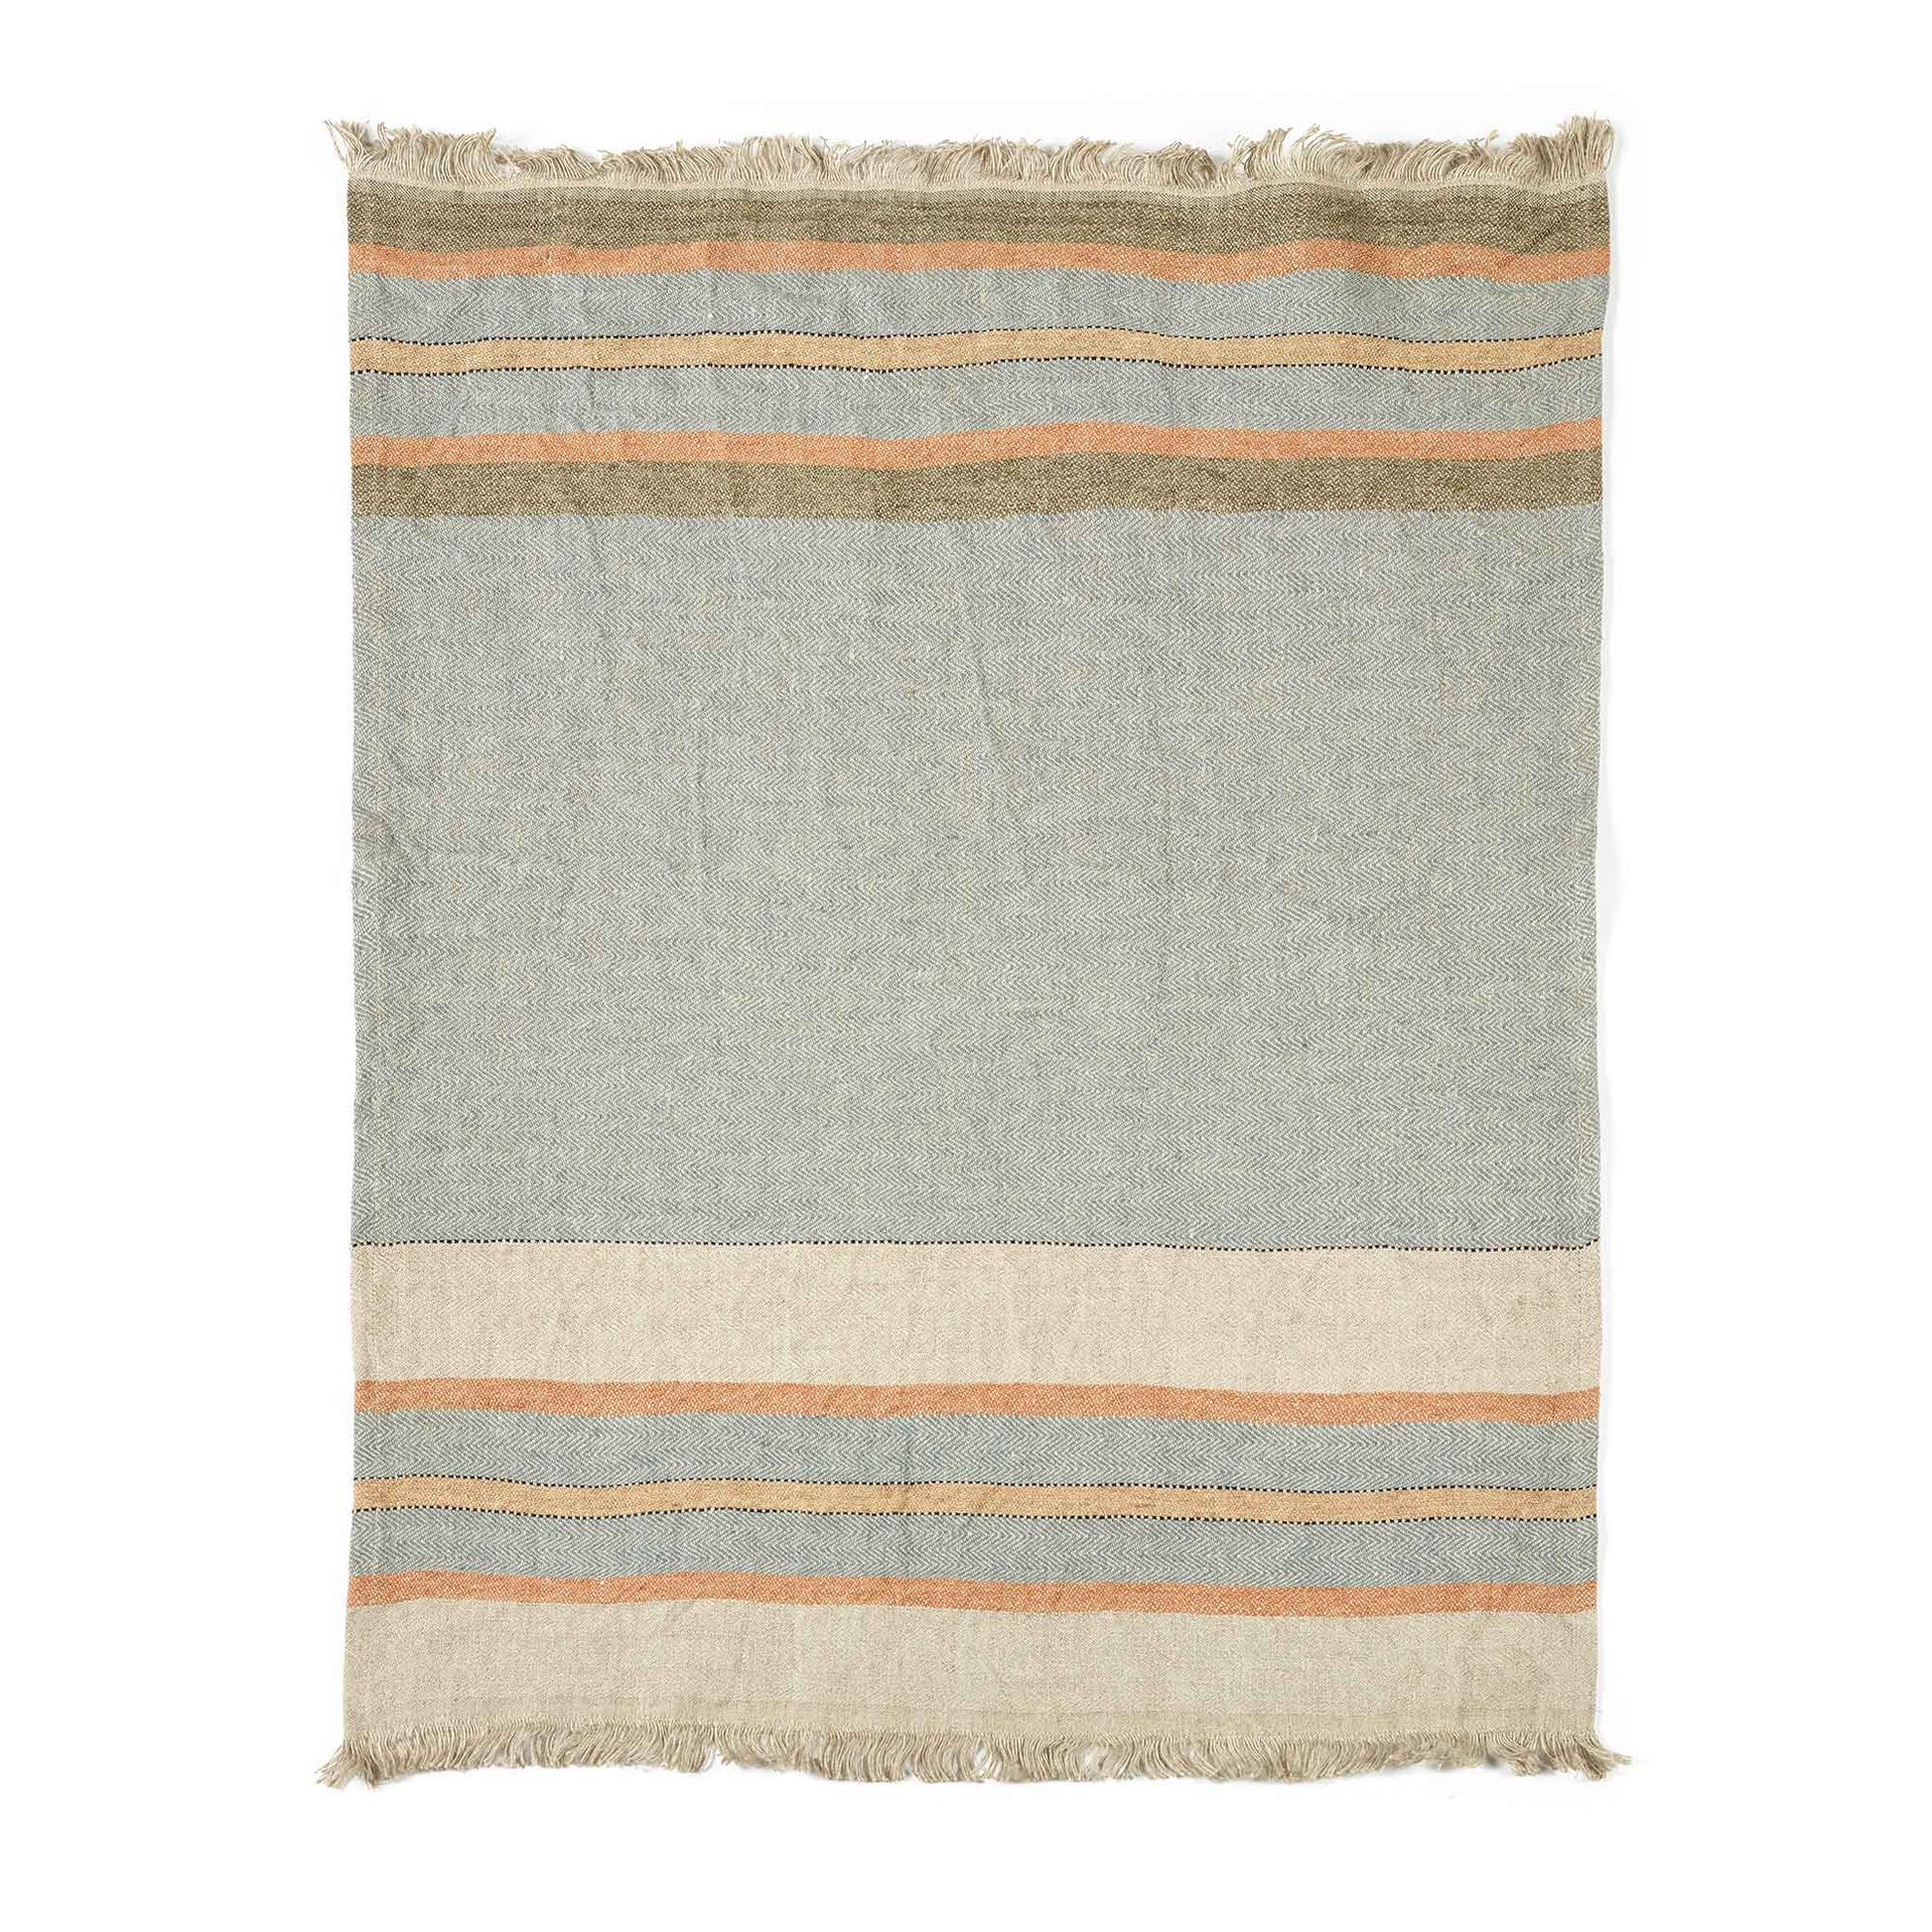 Belgian linen fouta throw blanket flat lay product shot in color Multi Stripe by Libeco for South Hous.